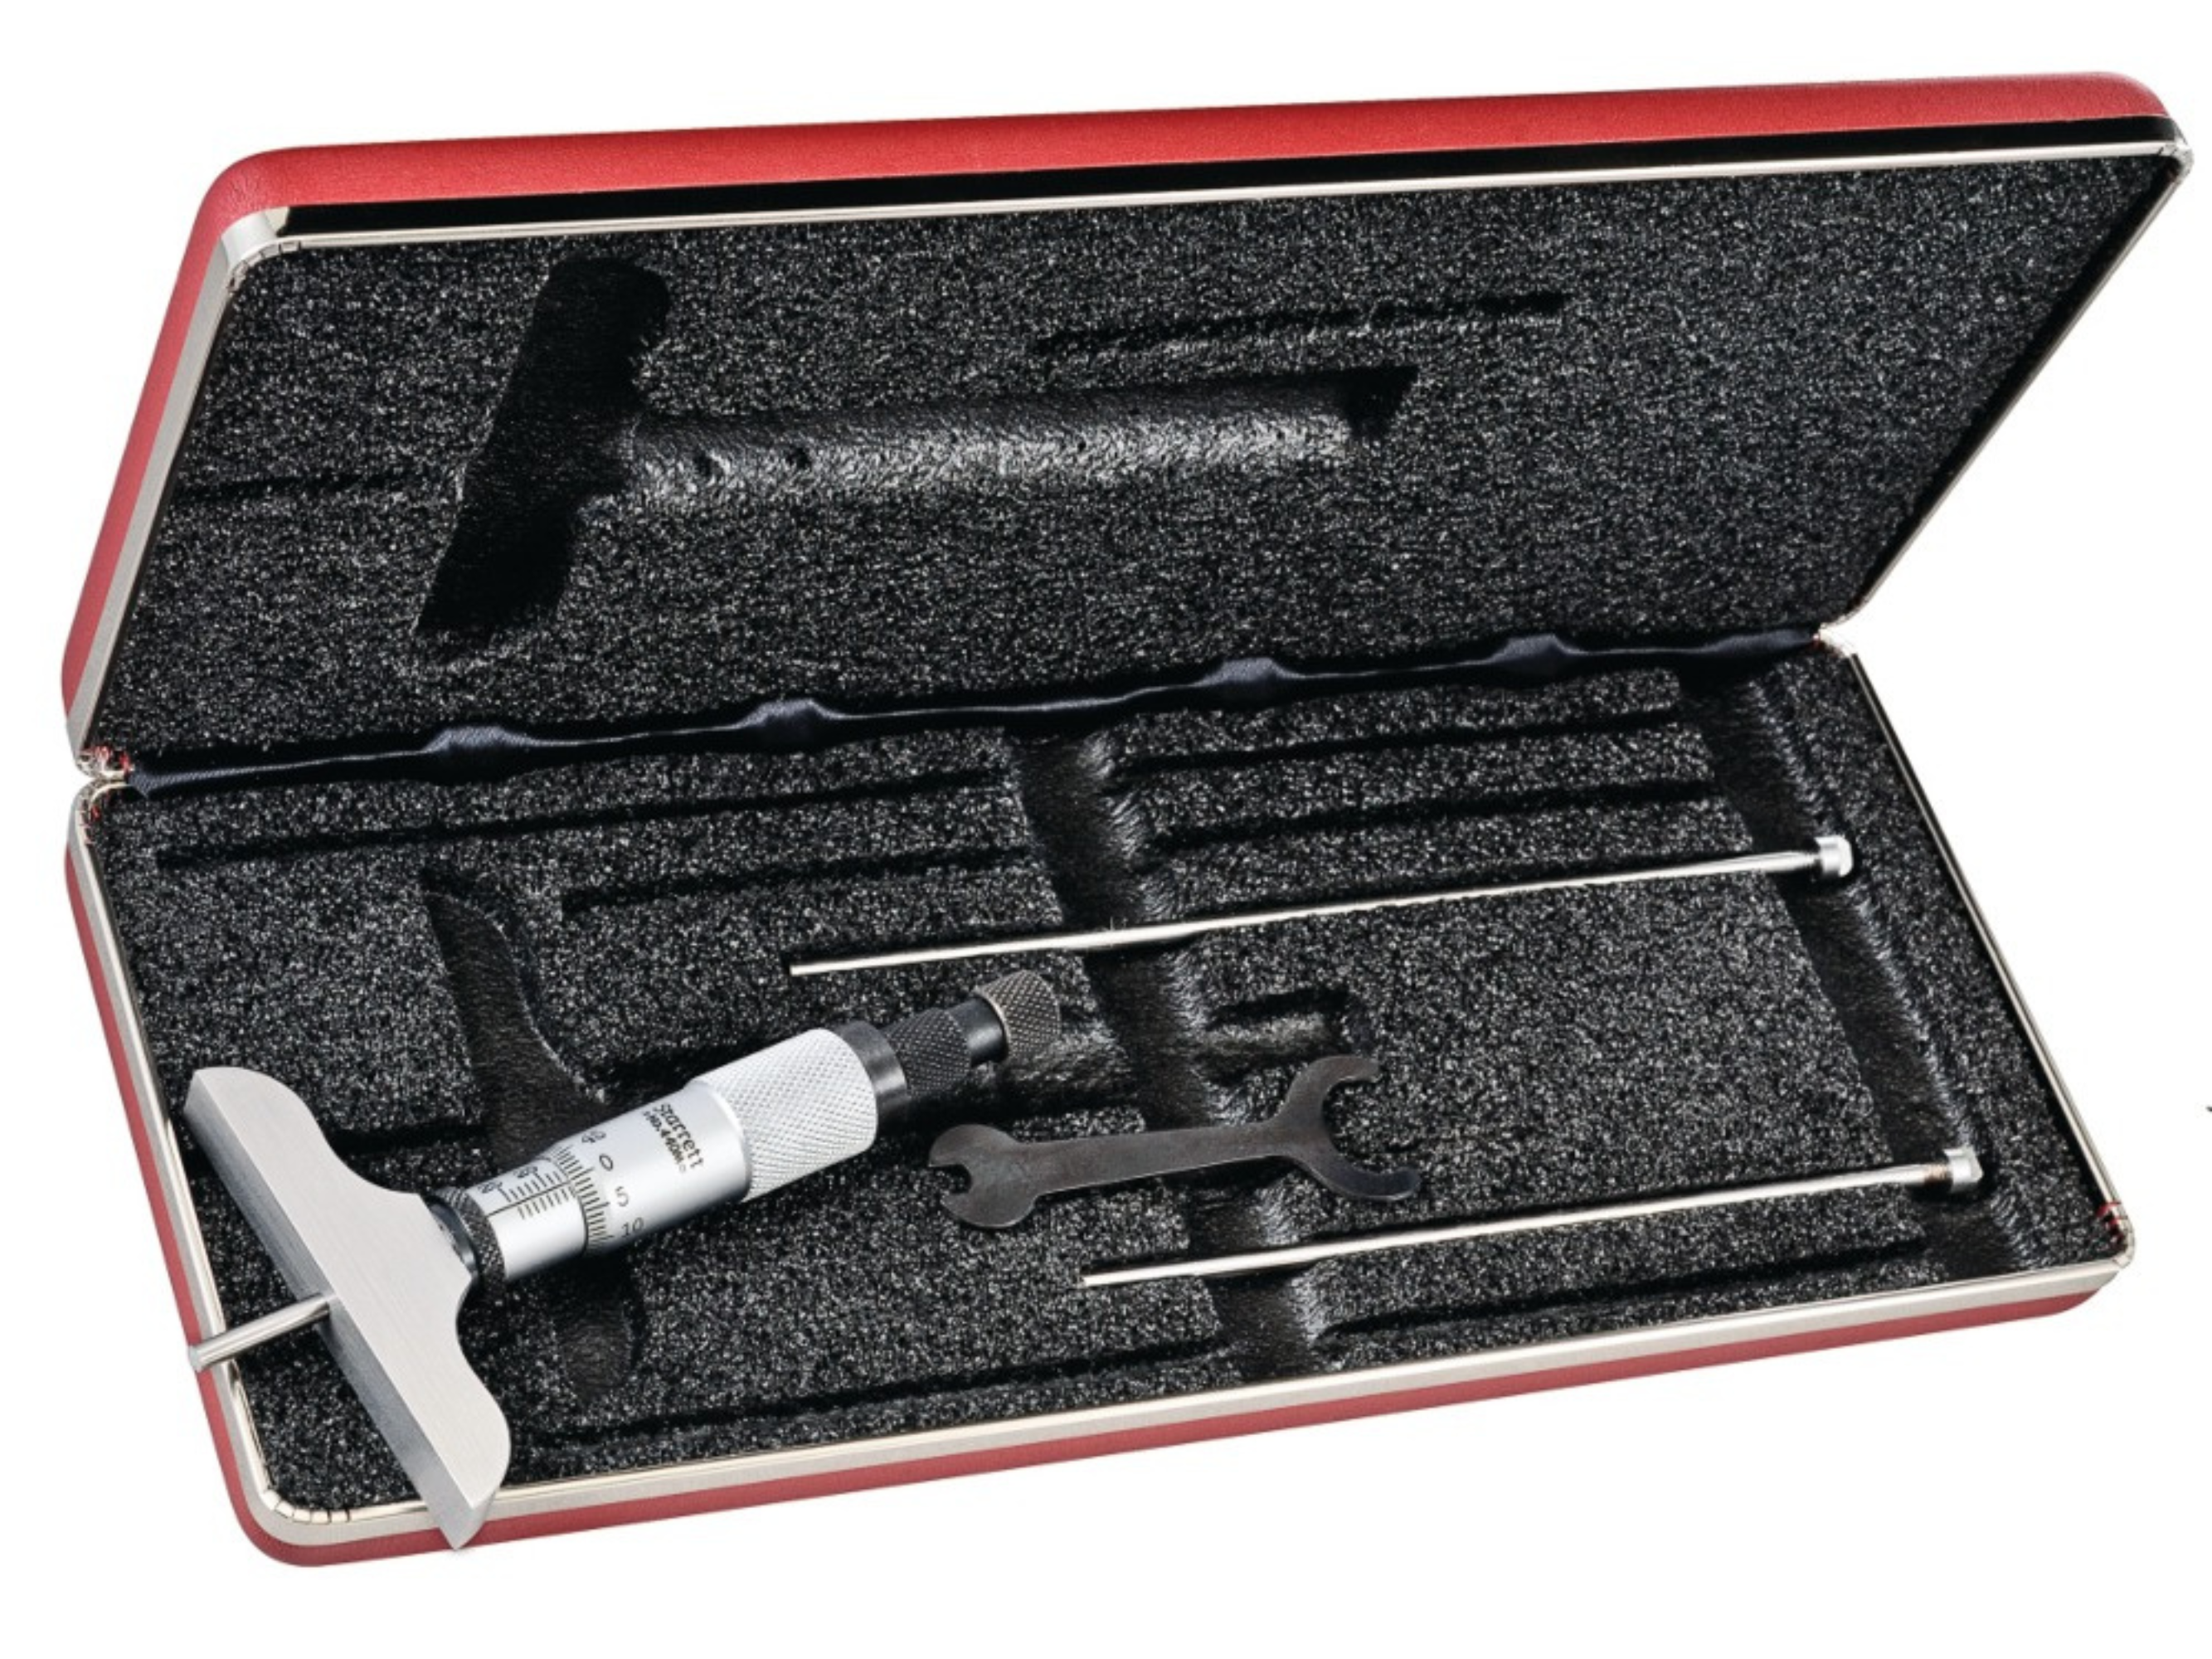 Warehouse Clearance Item: Depth Micrometer 0-75mm